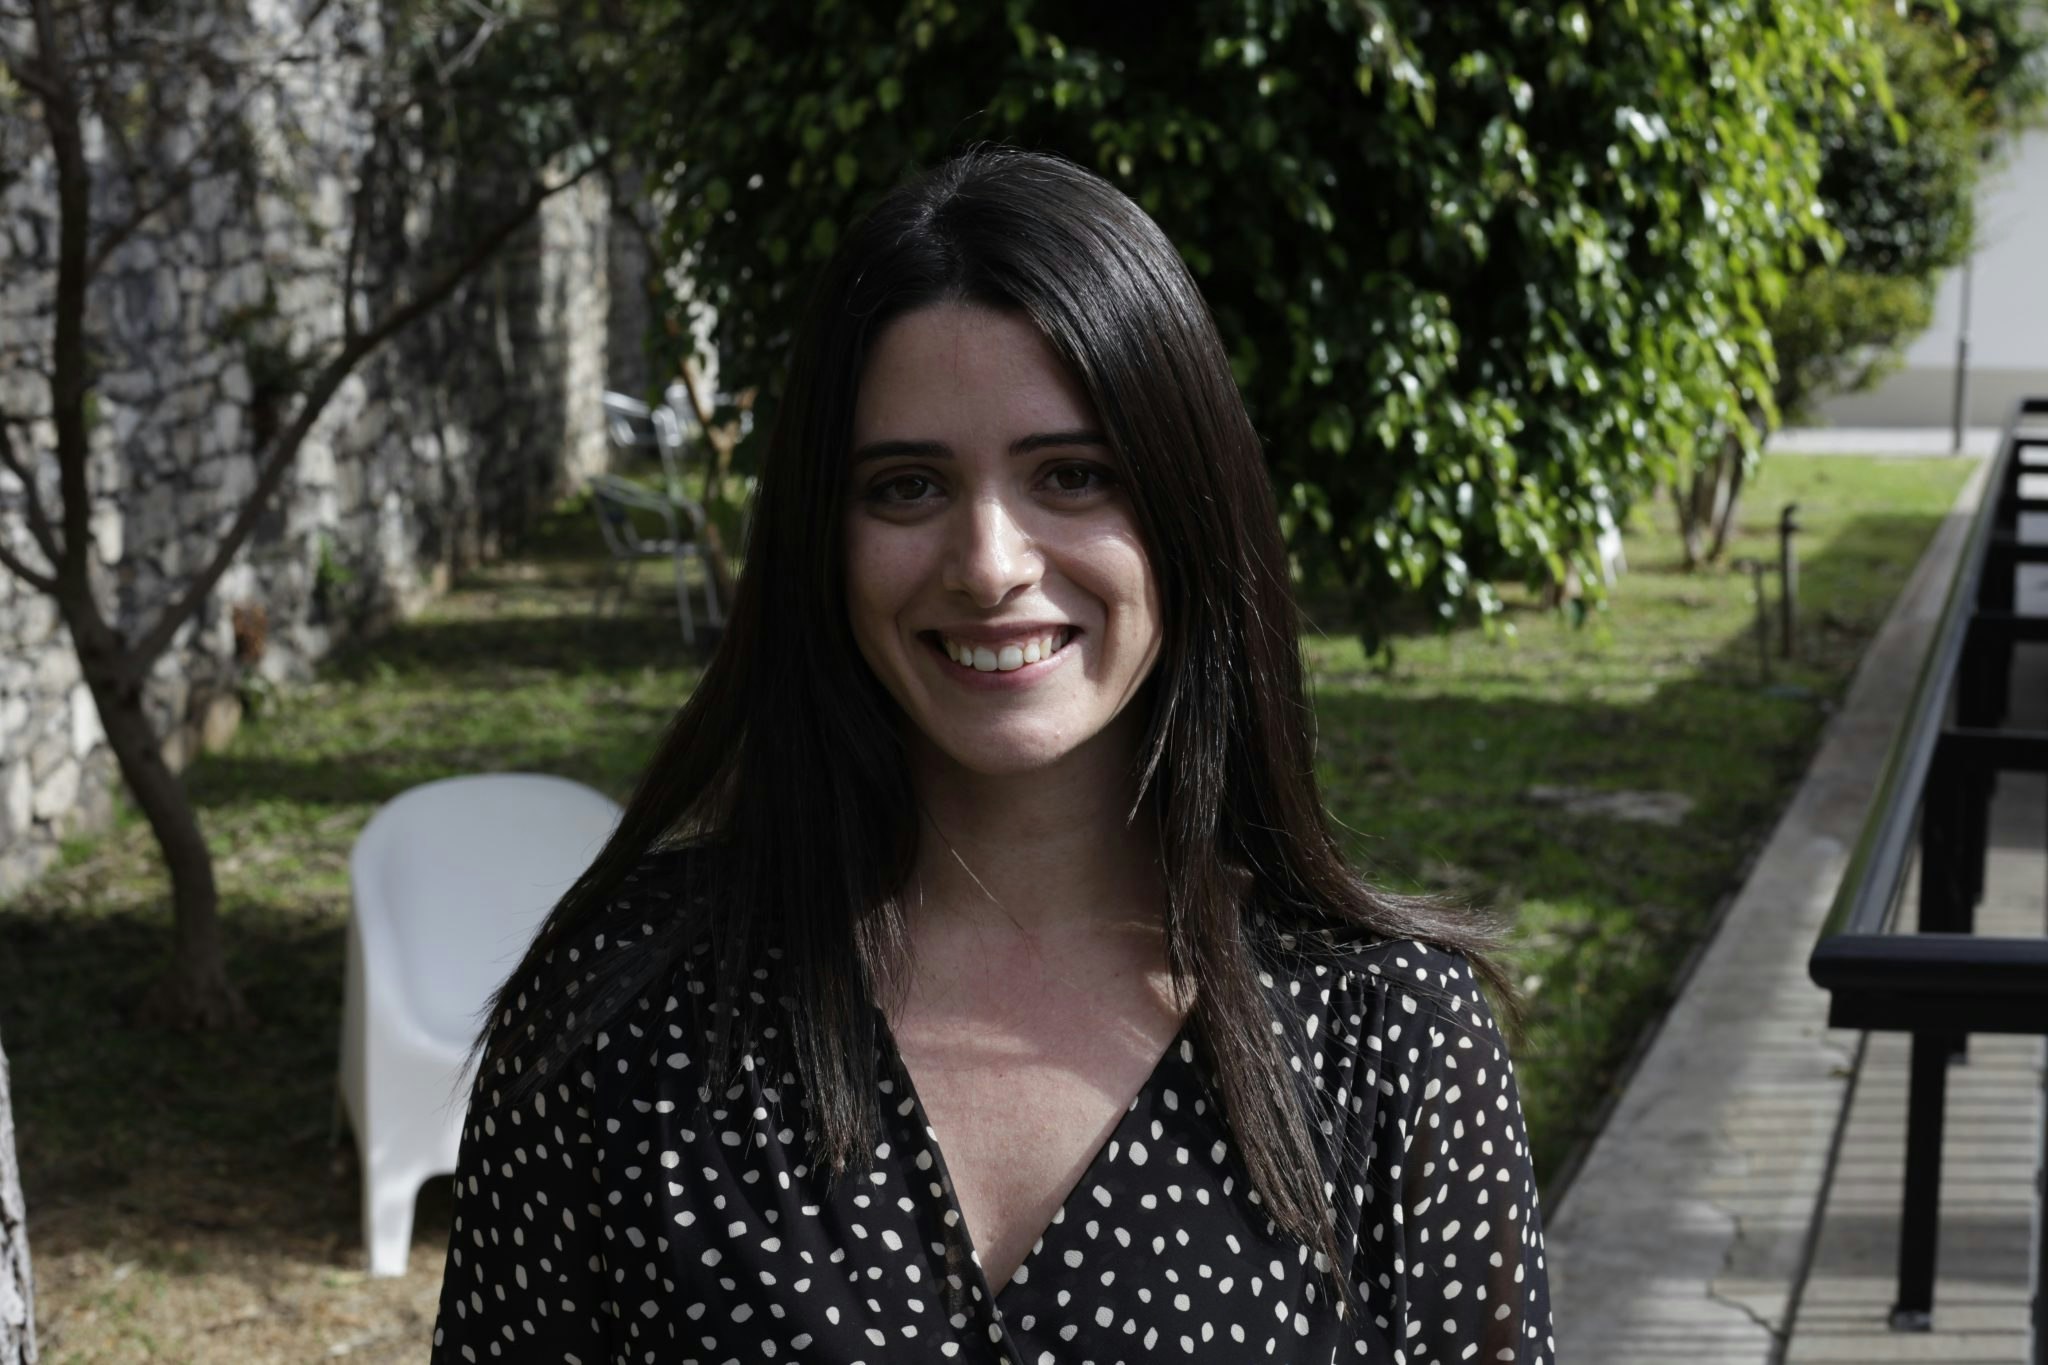 An image of Micaela Viera, project manager for Startup Madeira.